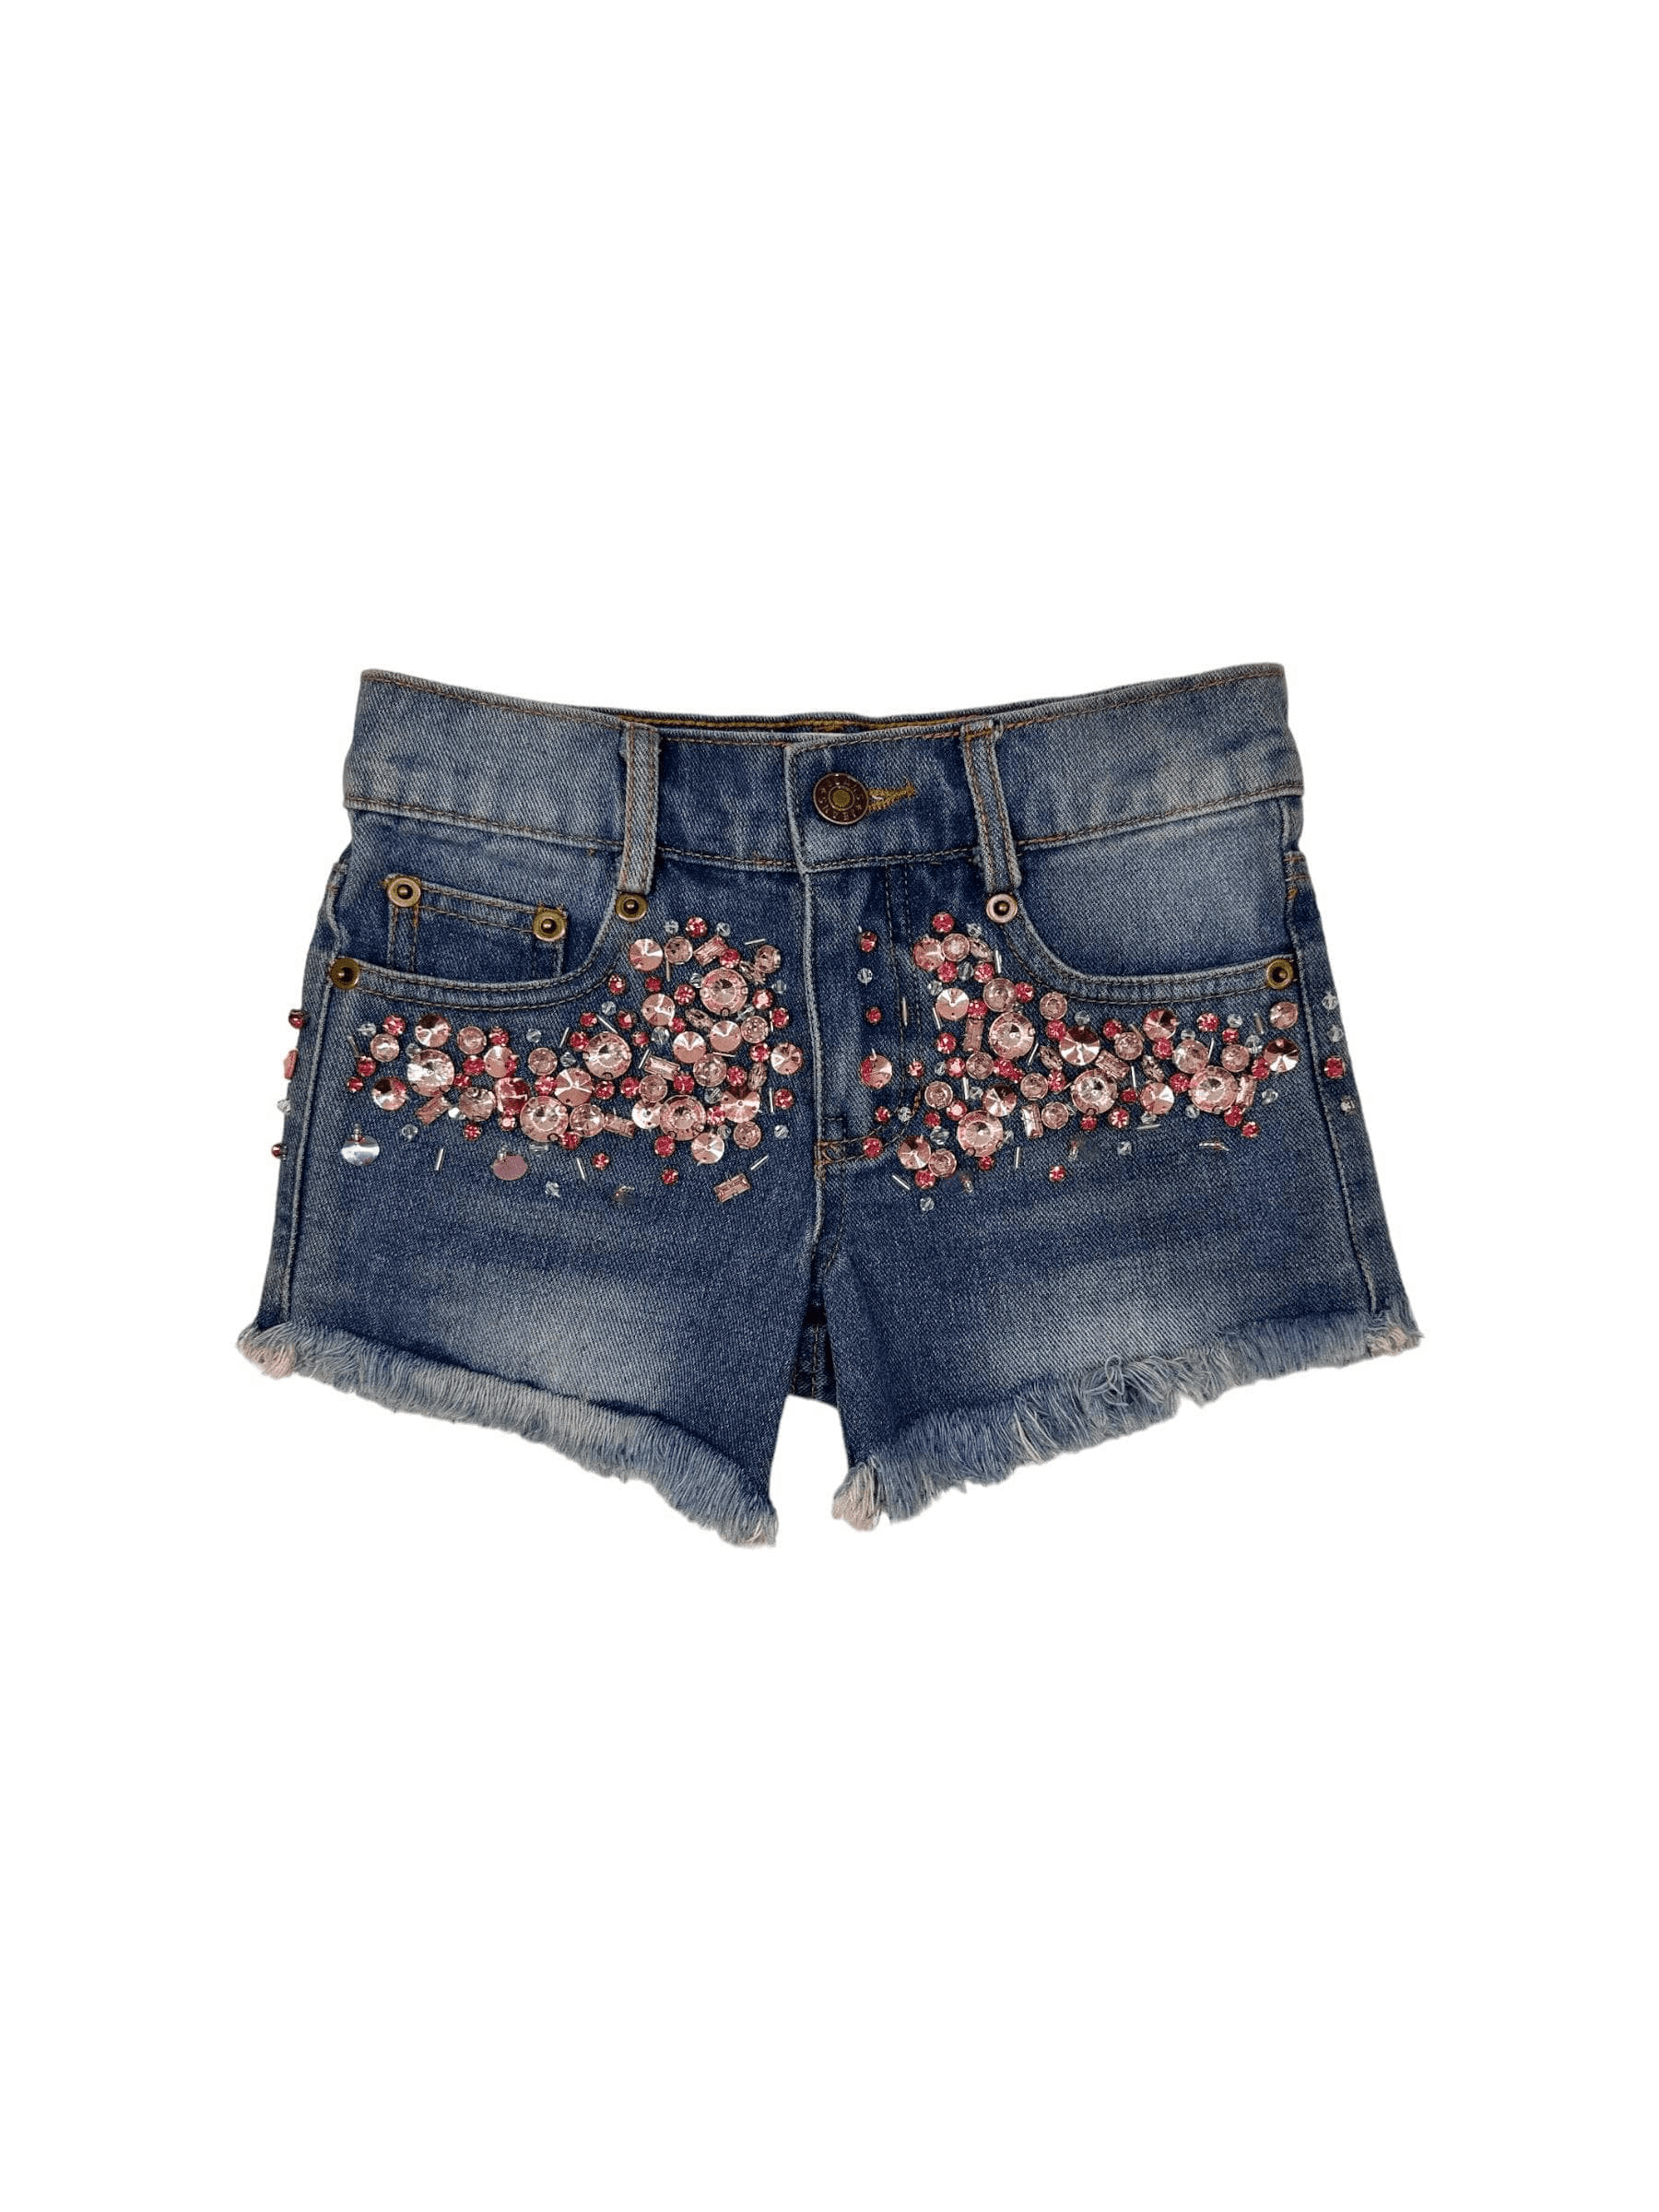 Pink Crystal Denim Shorts | Lola and the Boys | Iris Gifts & Décor